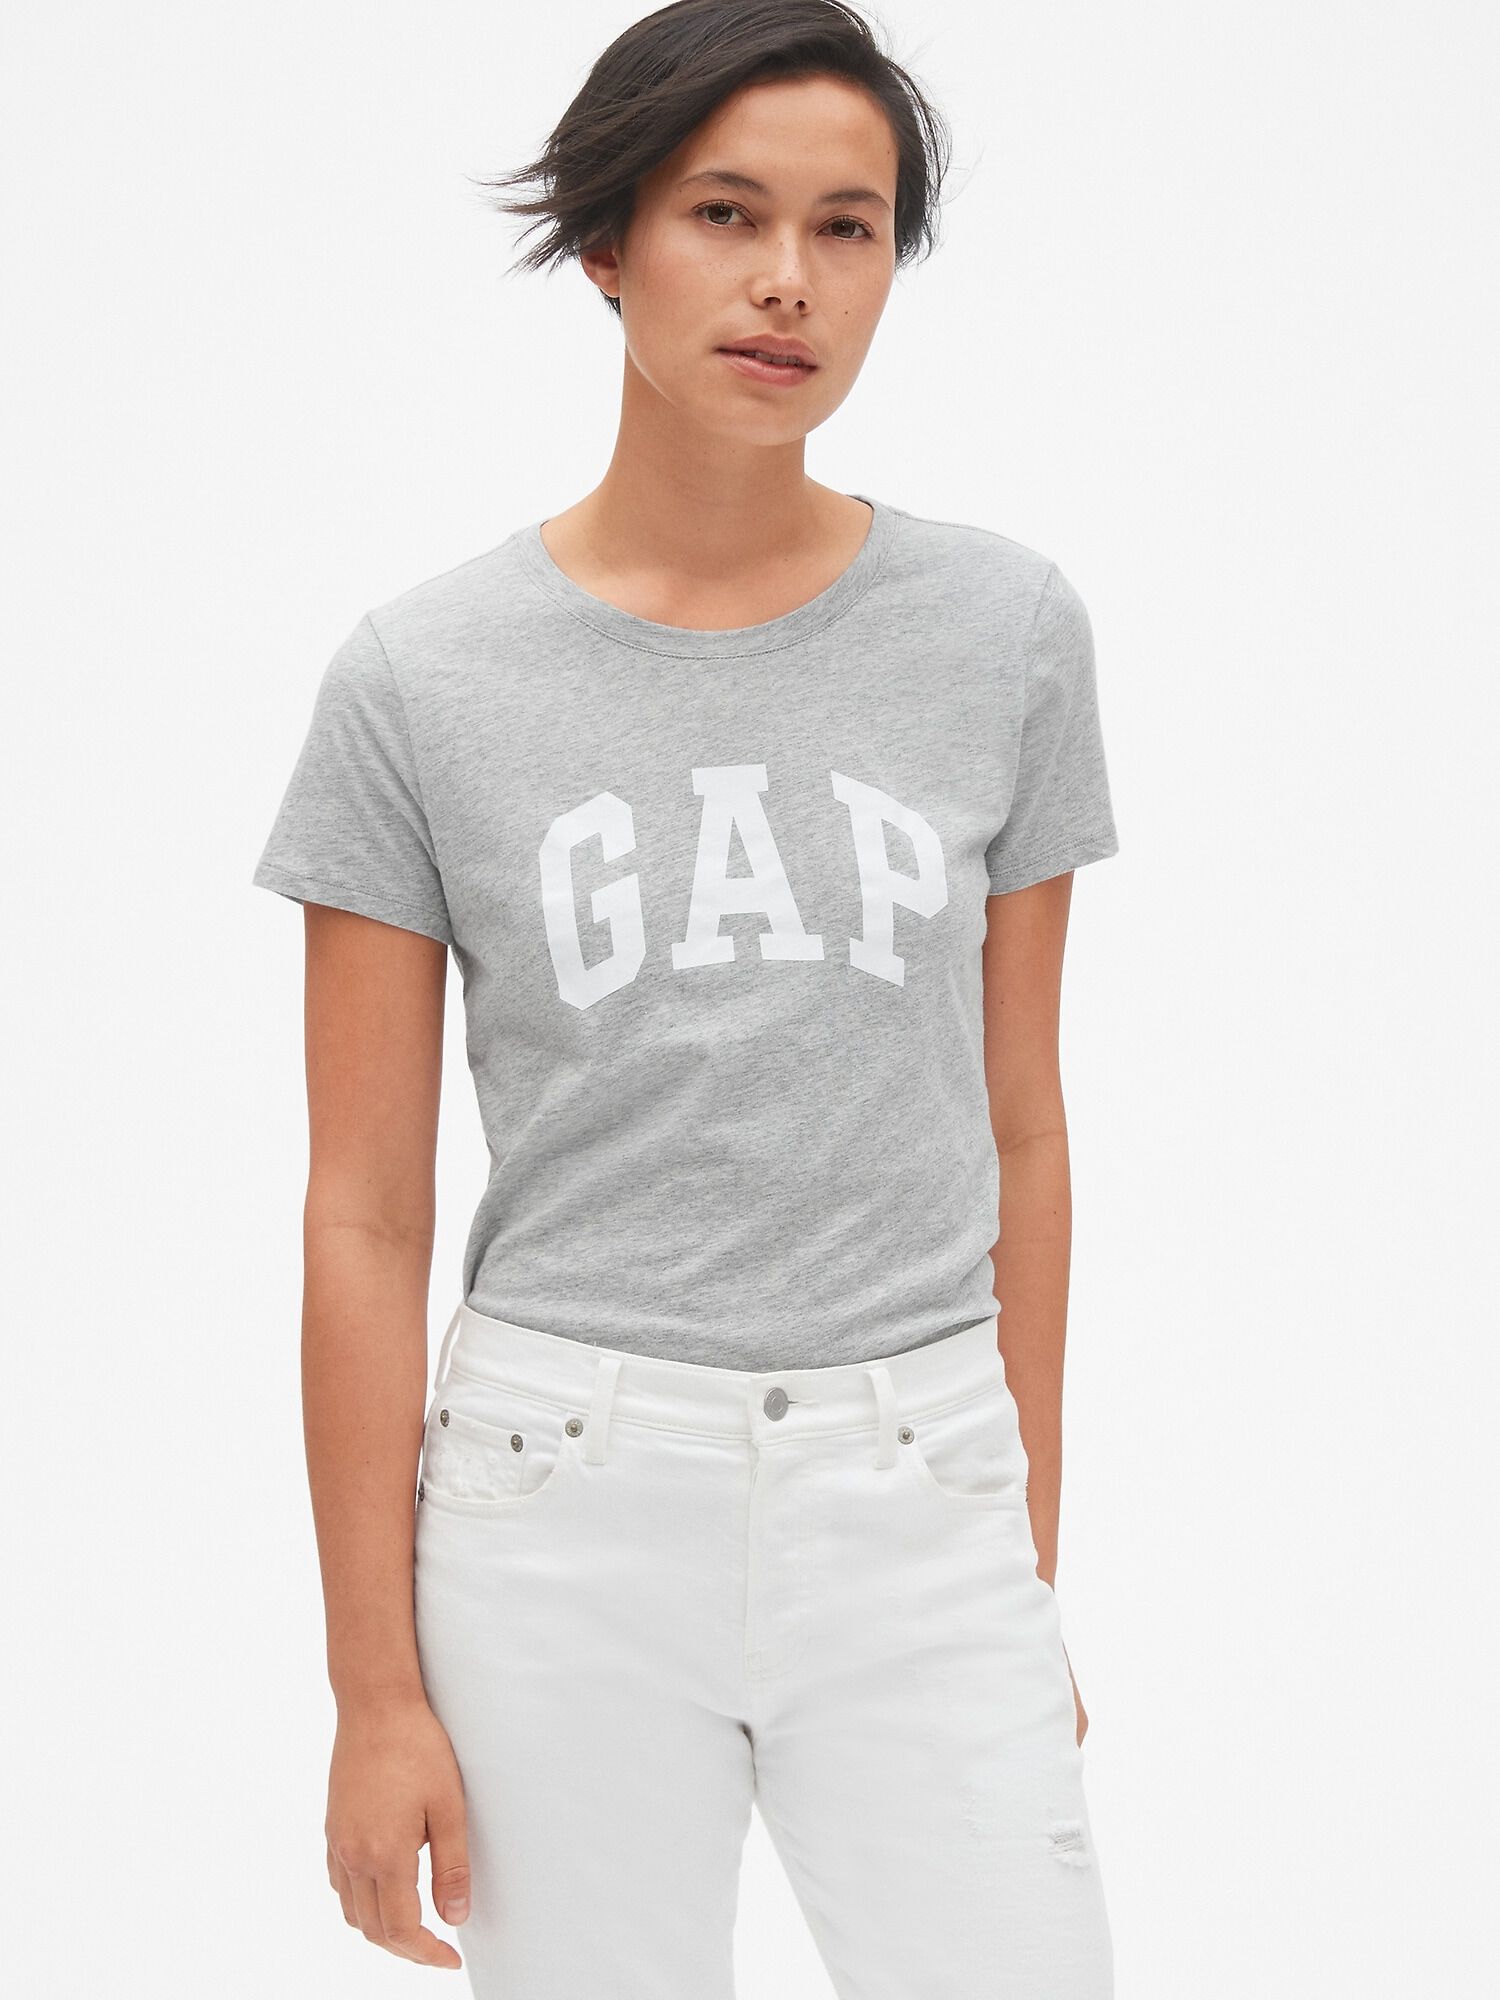 Key Items Every Wardrobe Needs From Gap's Spring 2021 Edit | Who What ...